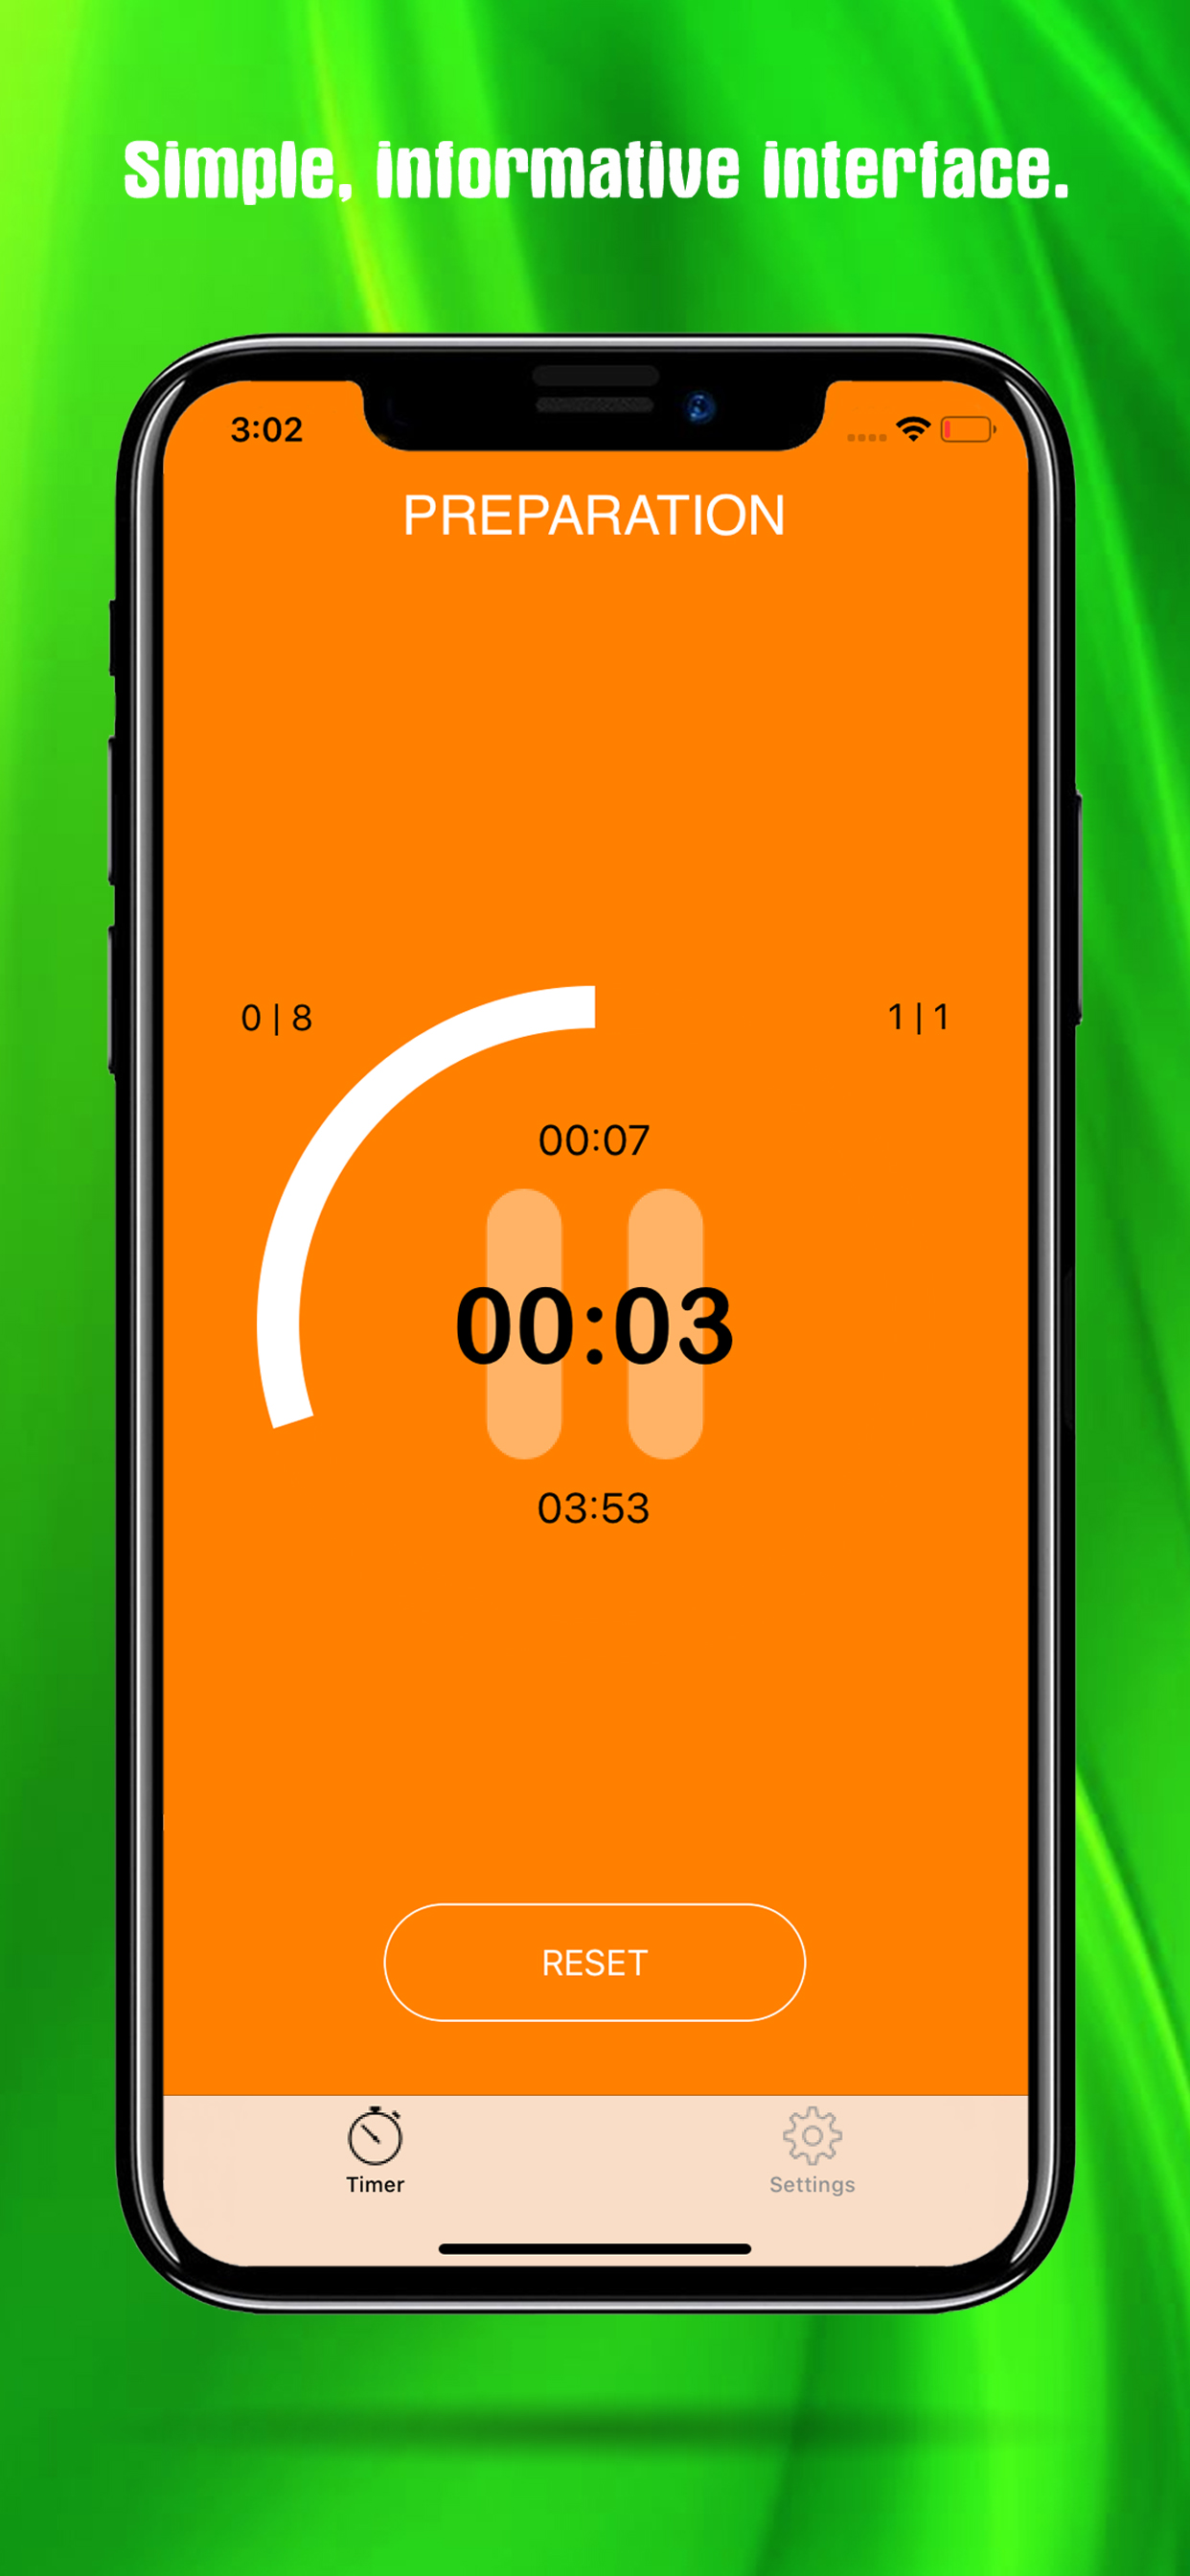 Tabata timer with music